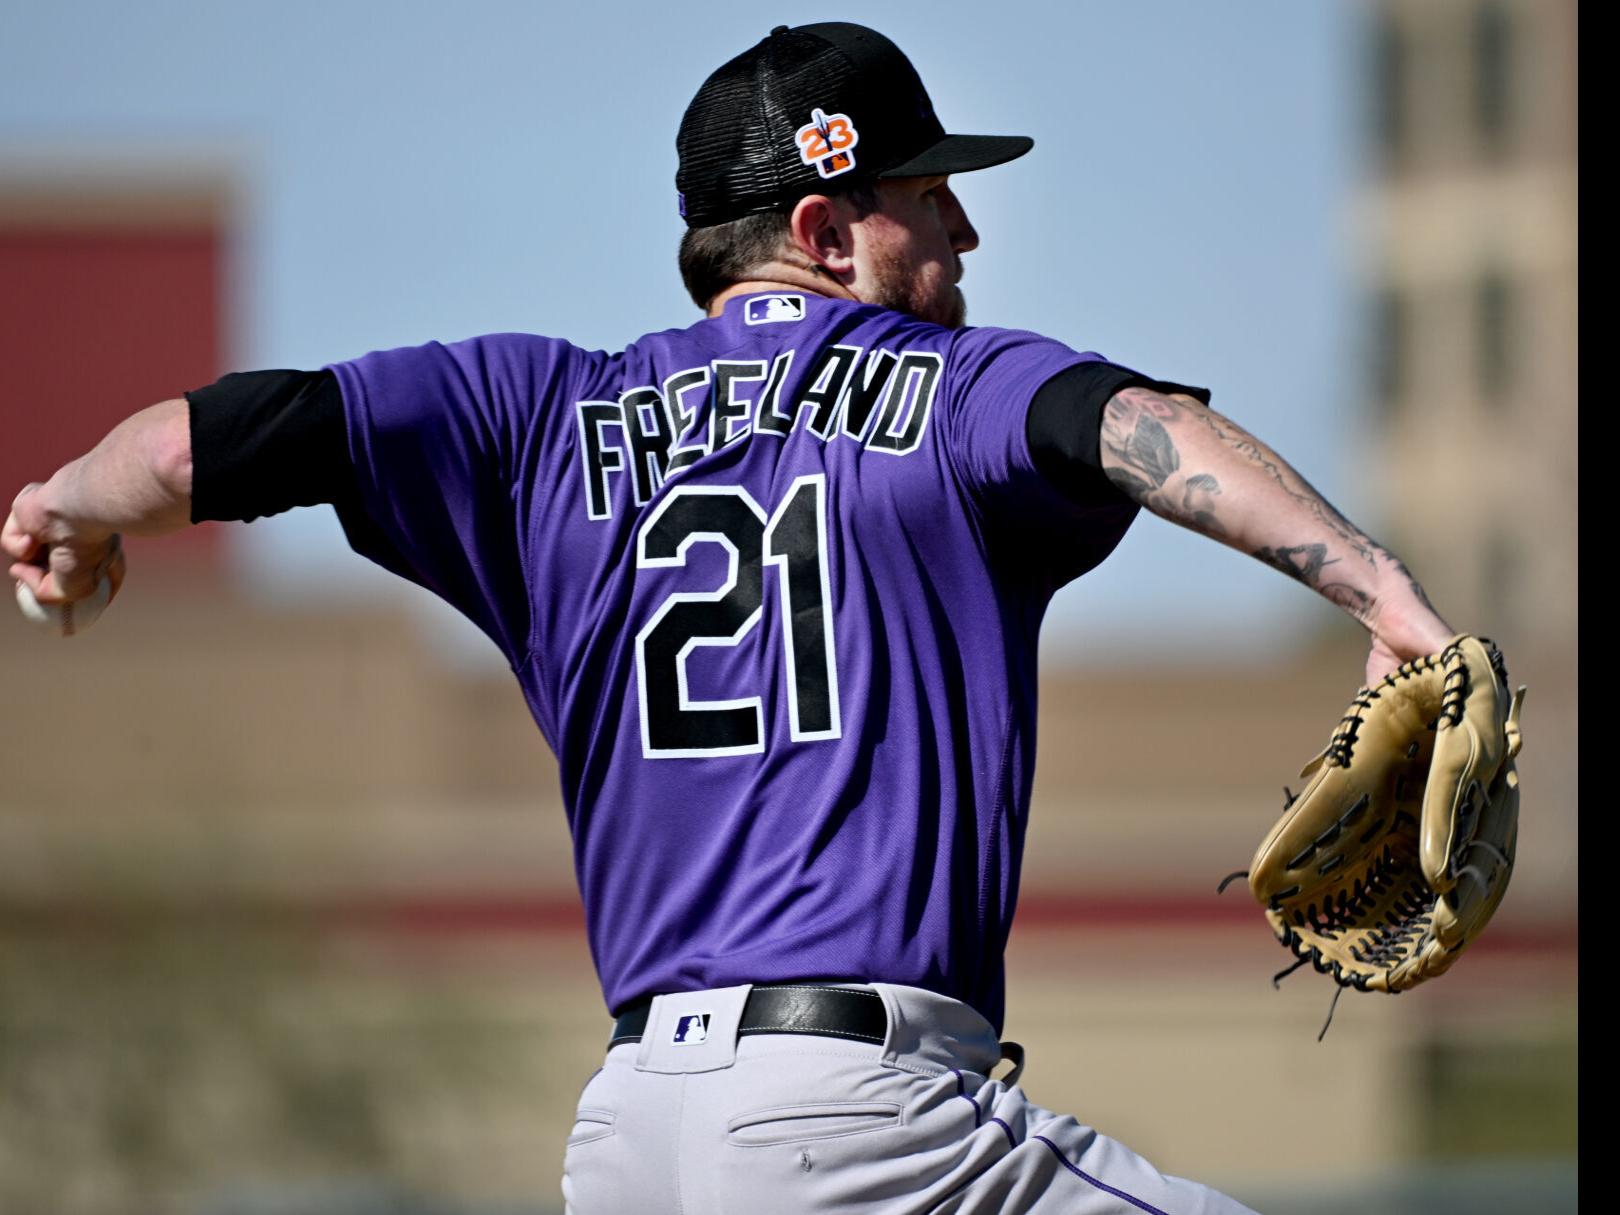 At the midway point of the MLB season, the Colorado Rockies look